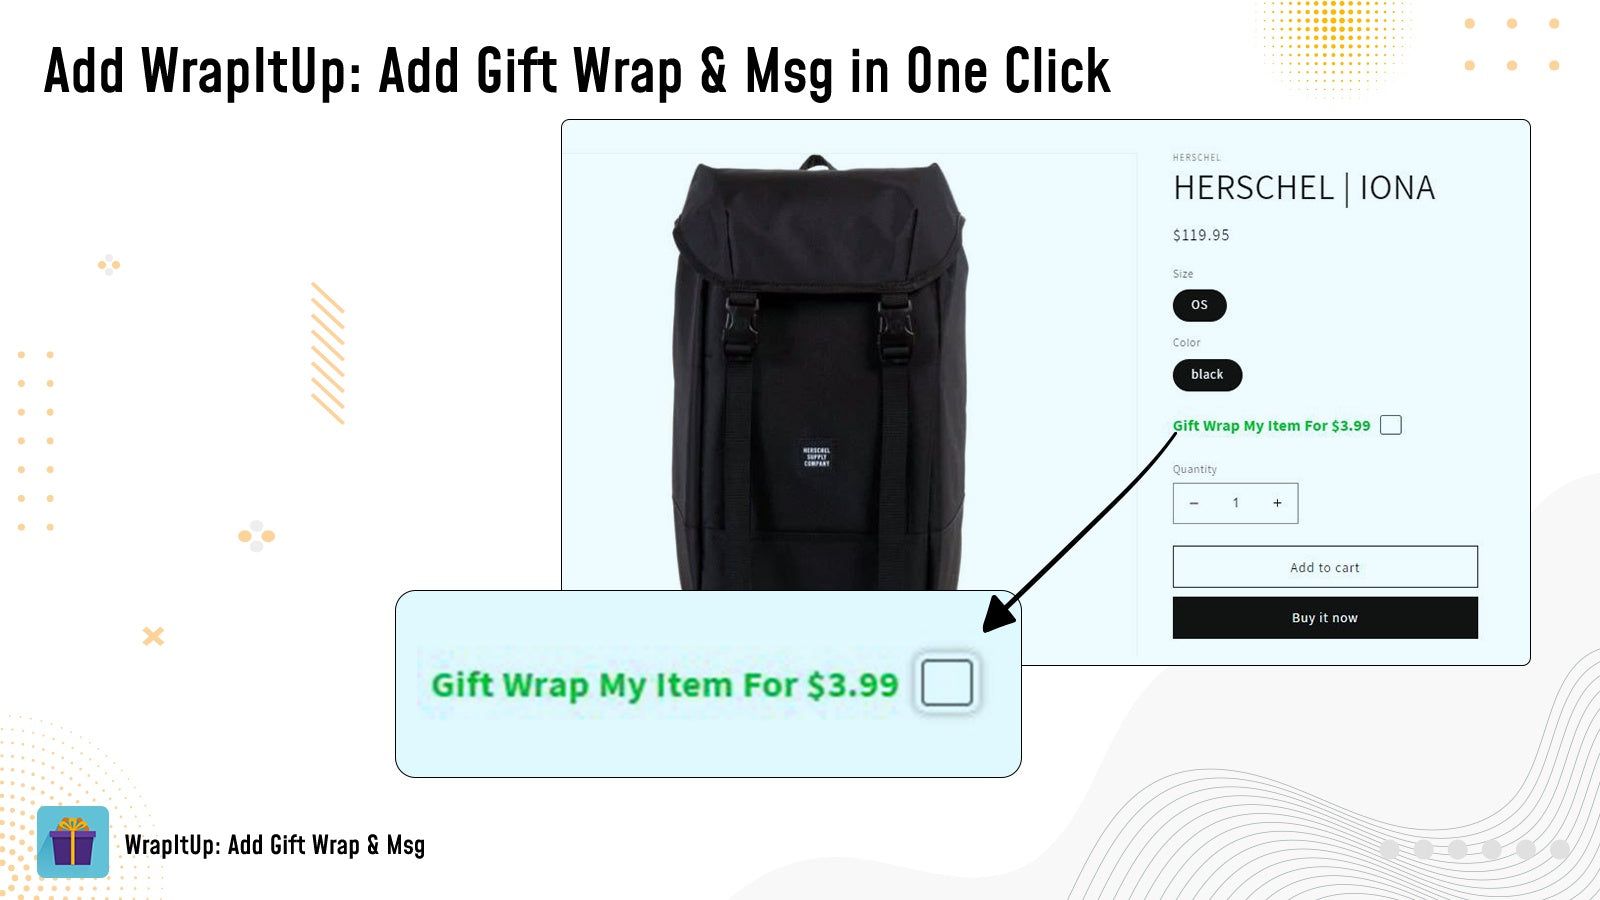 WrapItUp: Add Gift Wrap & Msg in One Click